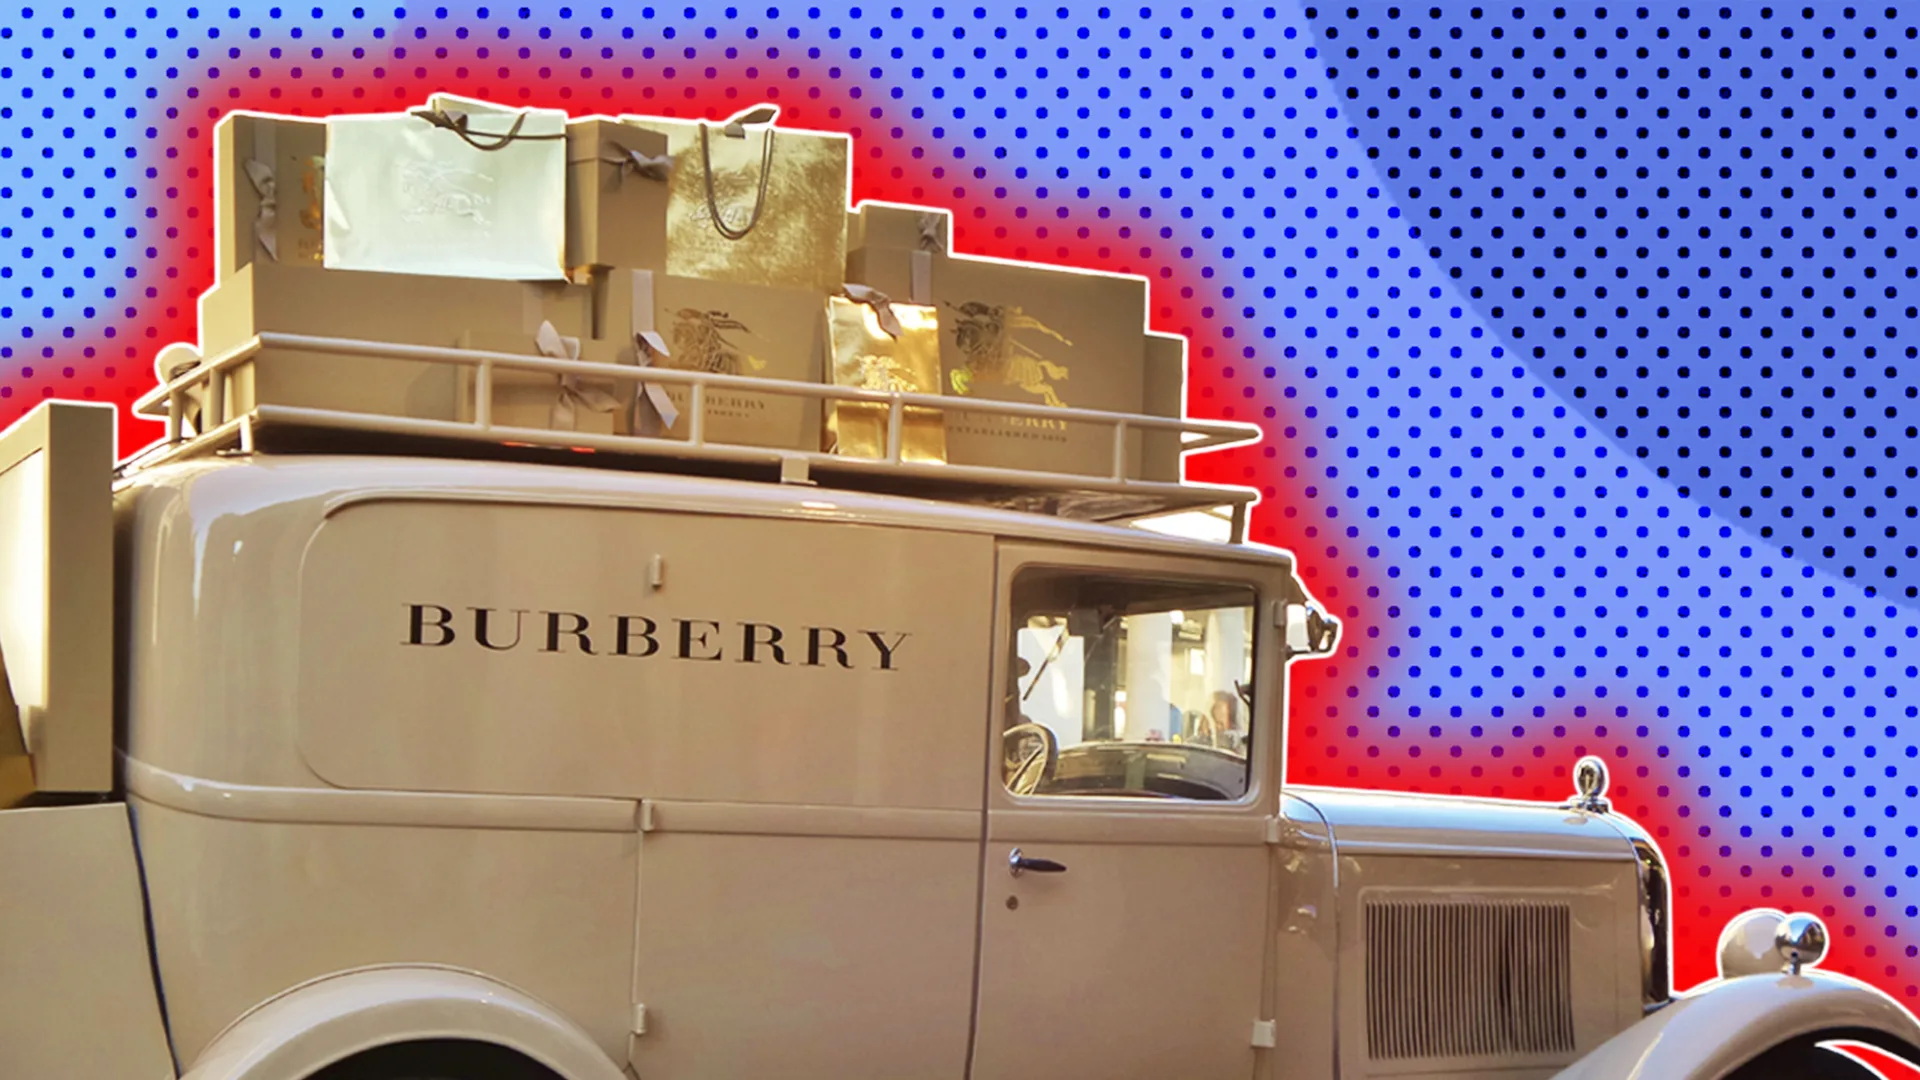 A Burberry van - in graphic house style